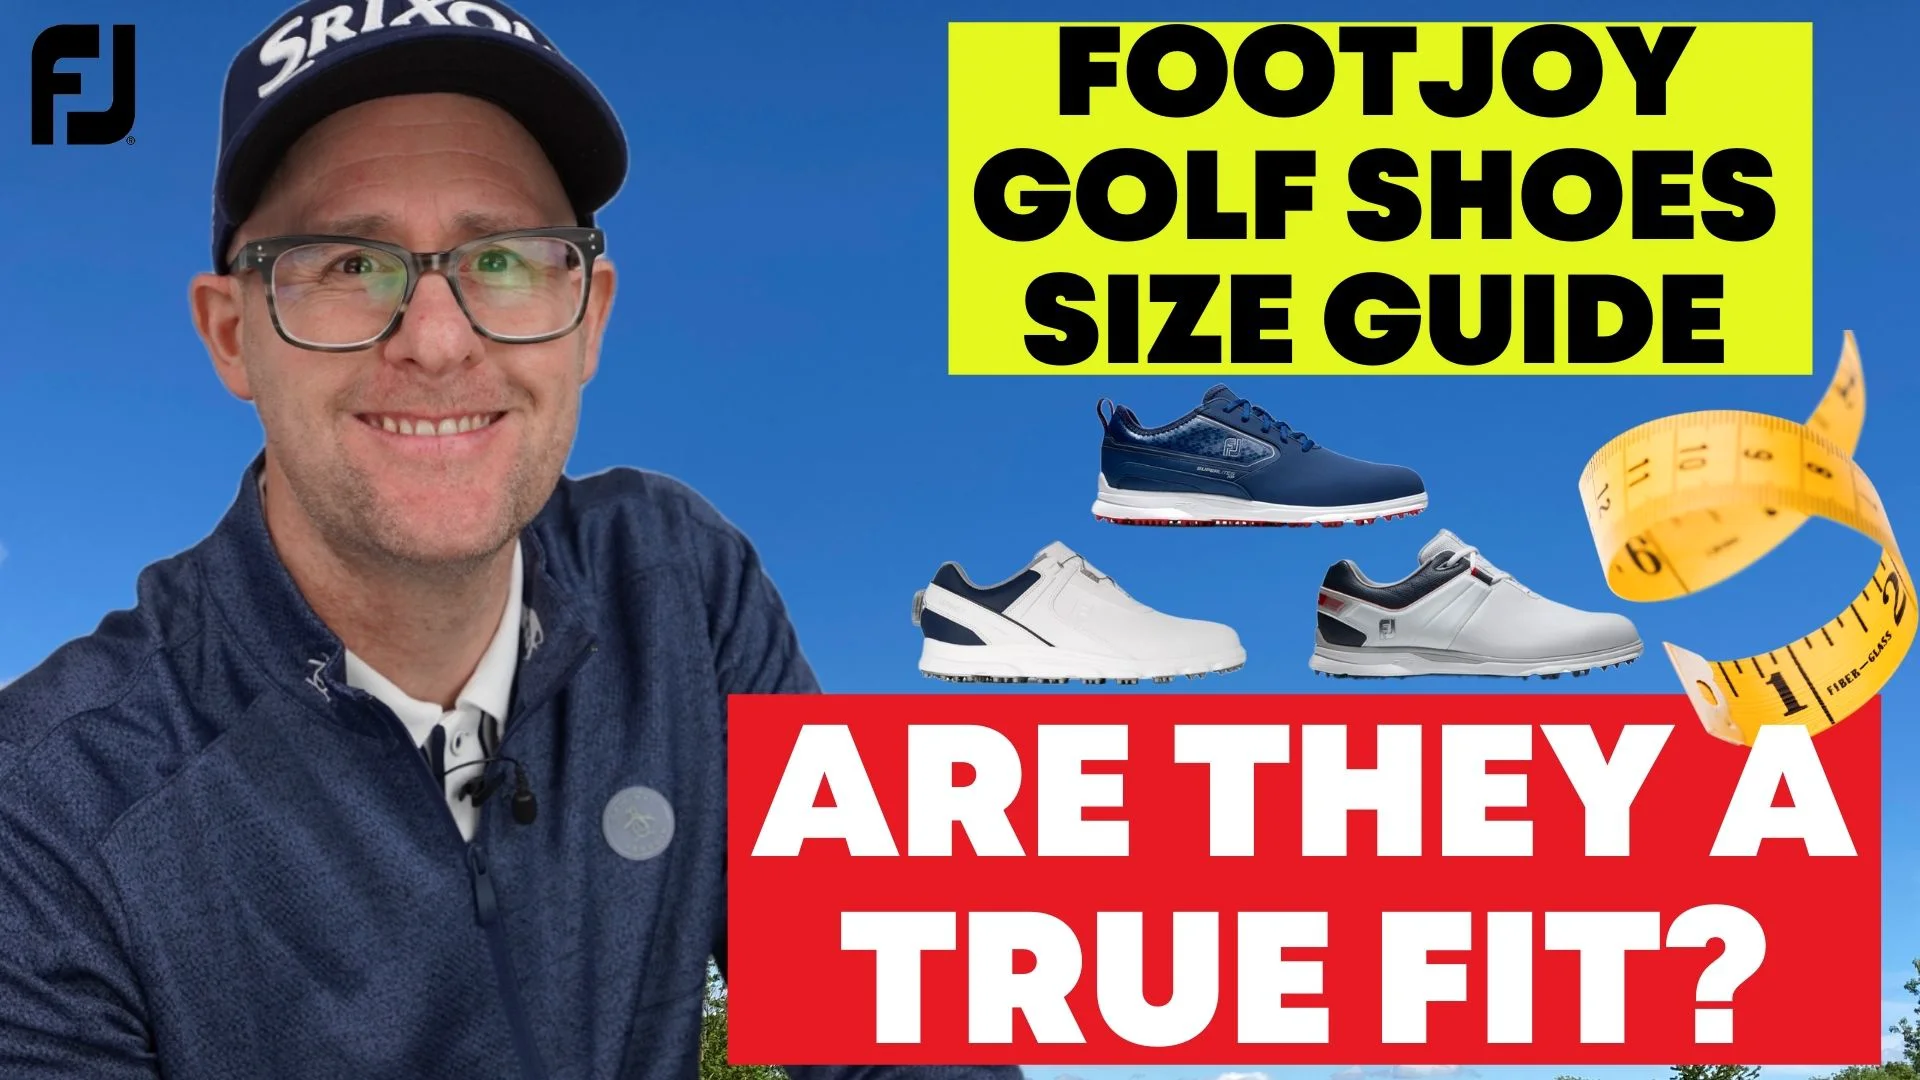 Golf Shoe Fitting Guide: Learn How Golf Shoes Should Fit